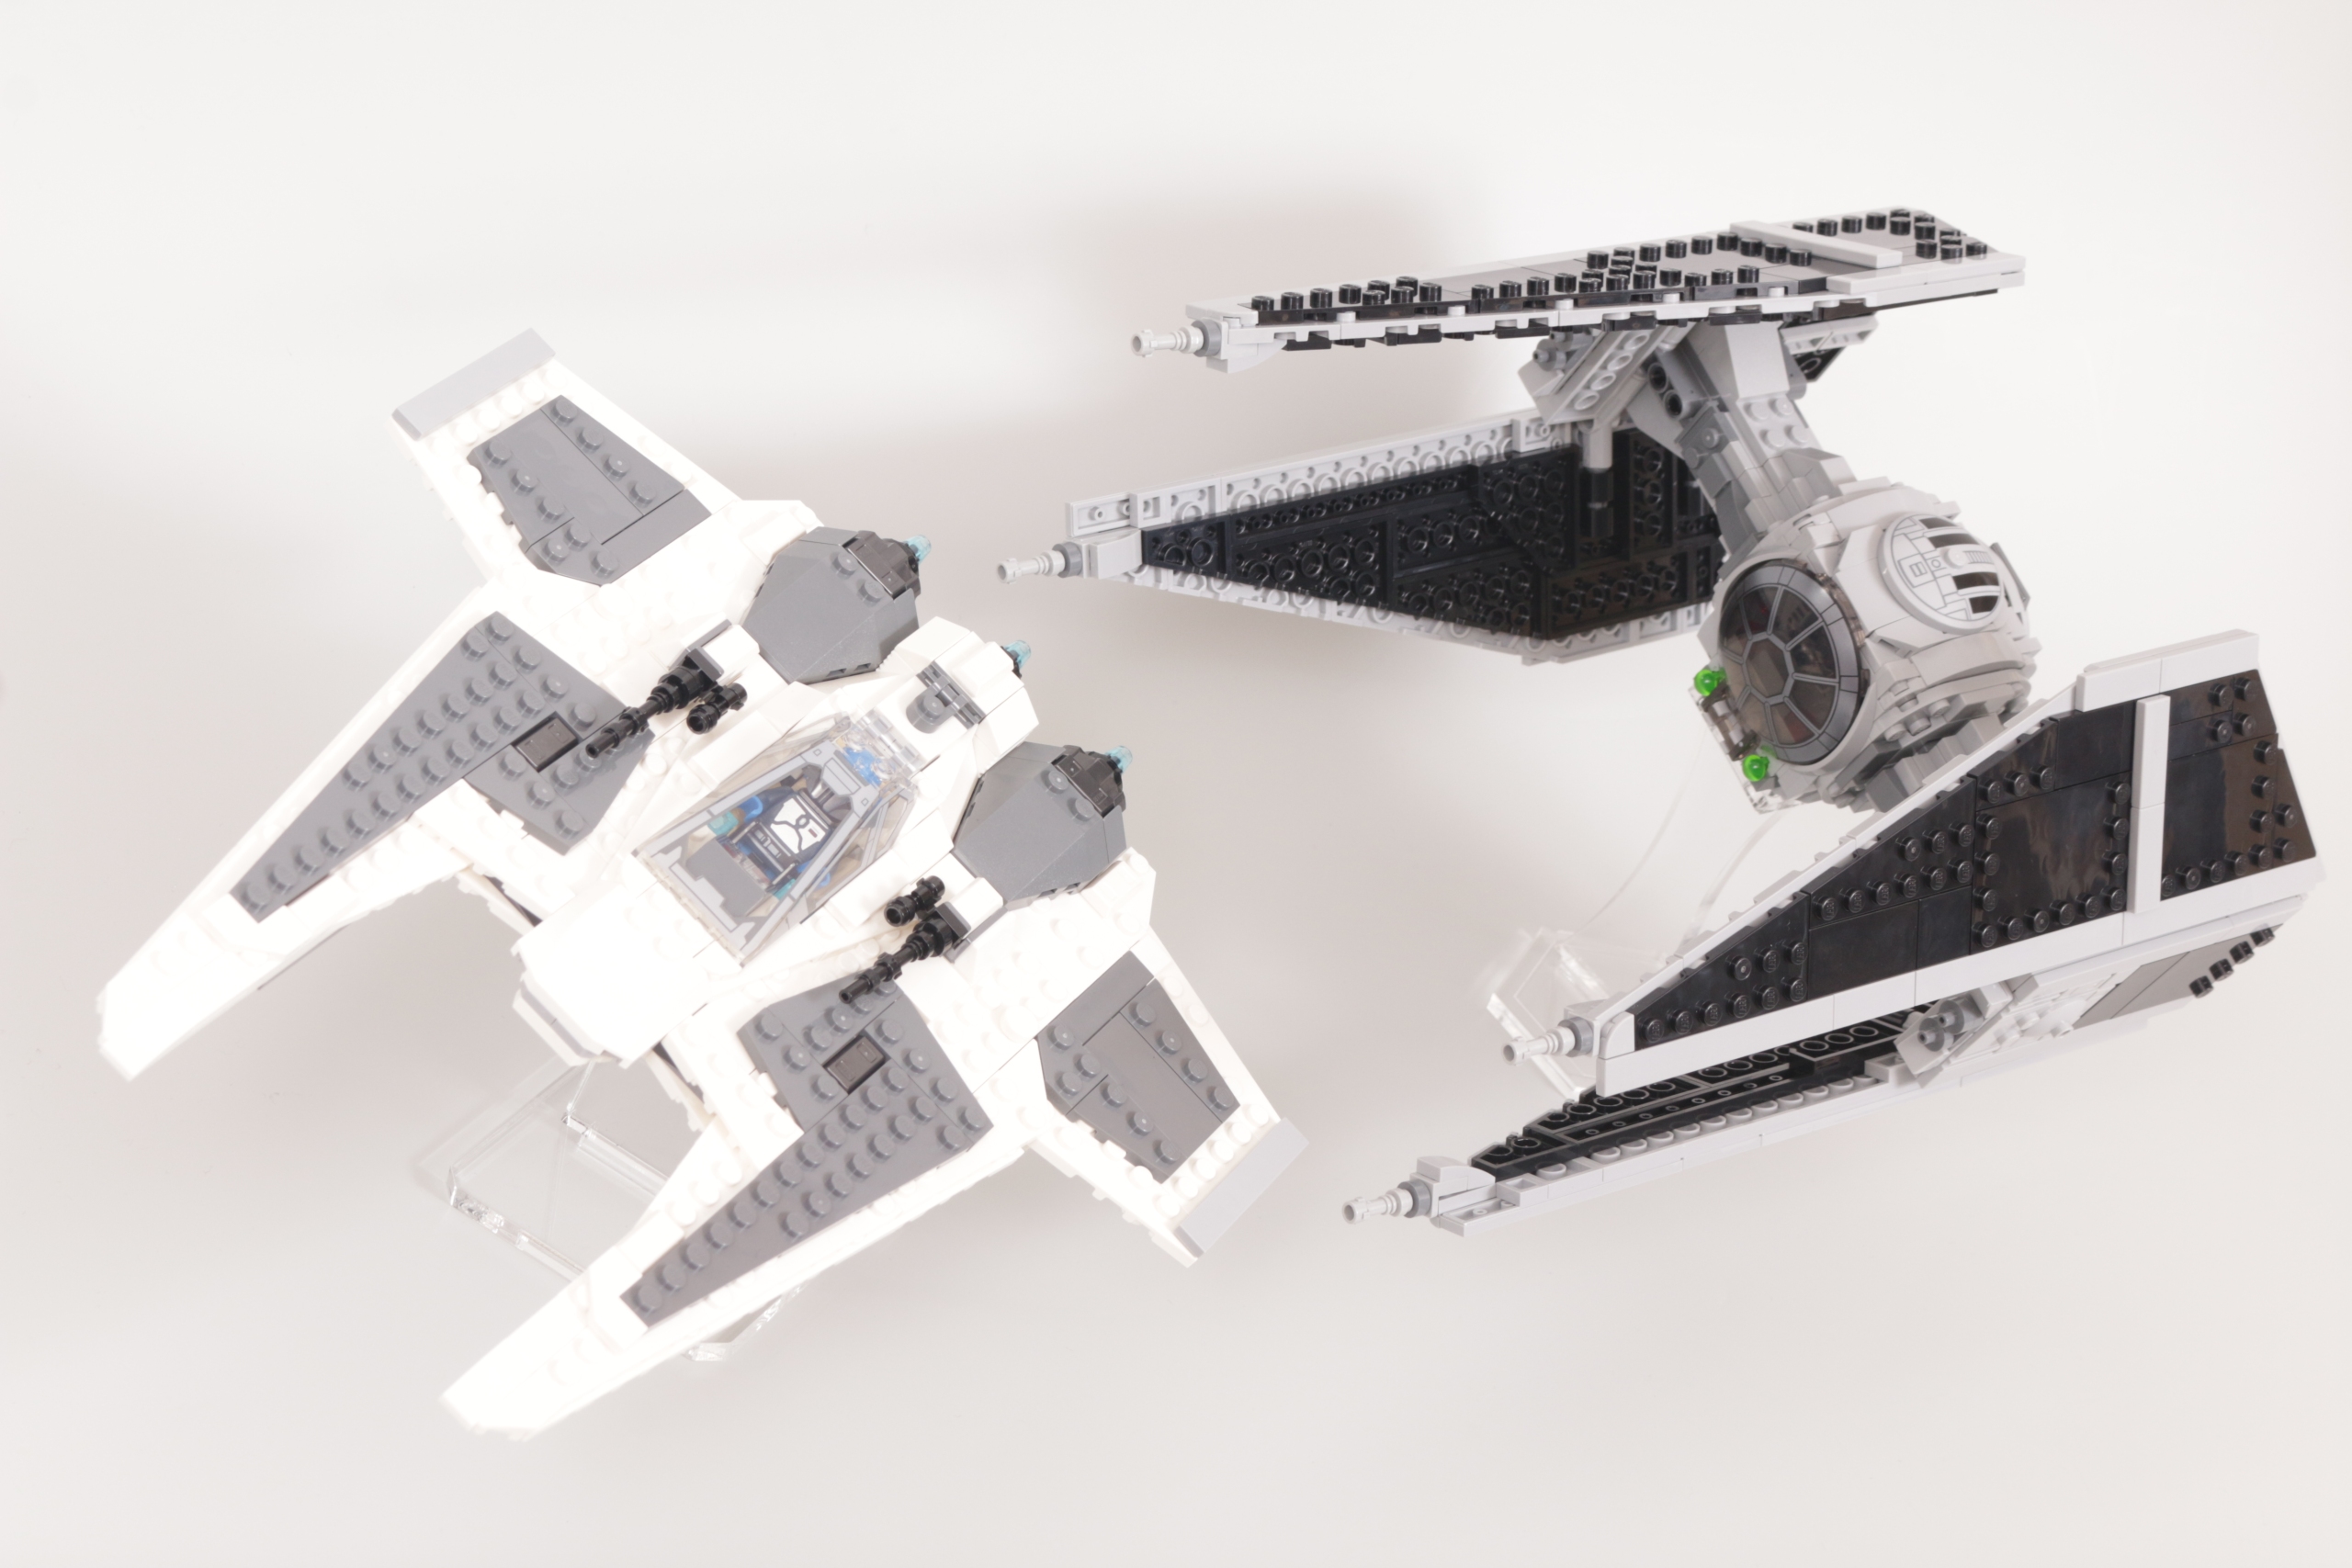 LEGO Star Wars 75348 Mandalorian Fang Fighter vs. TIE Interceptor review 6 scaled